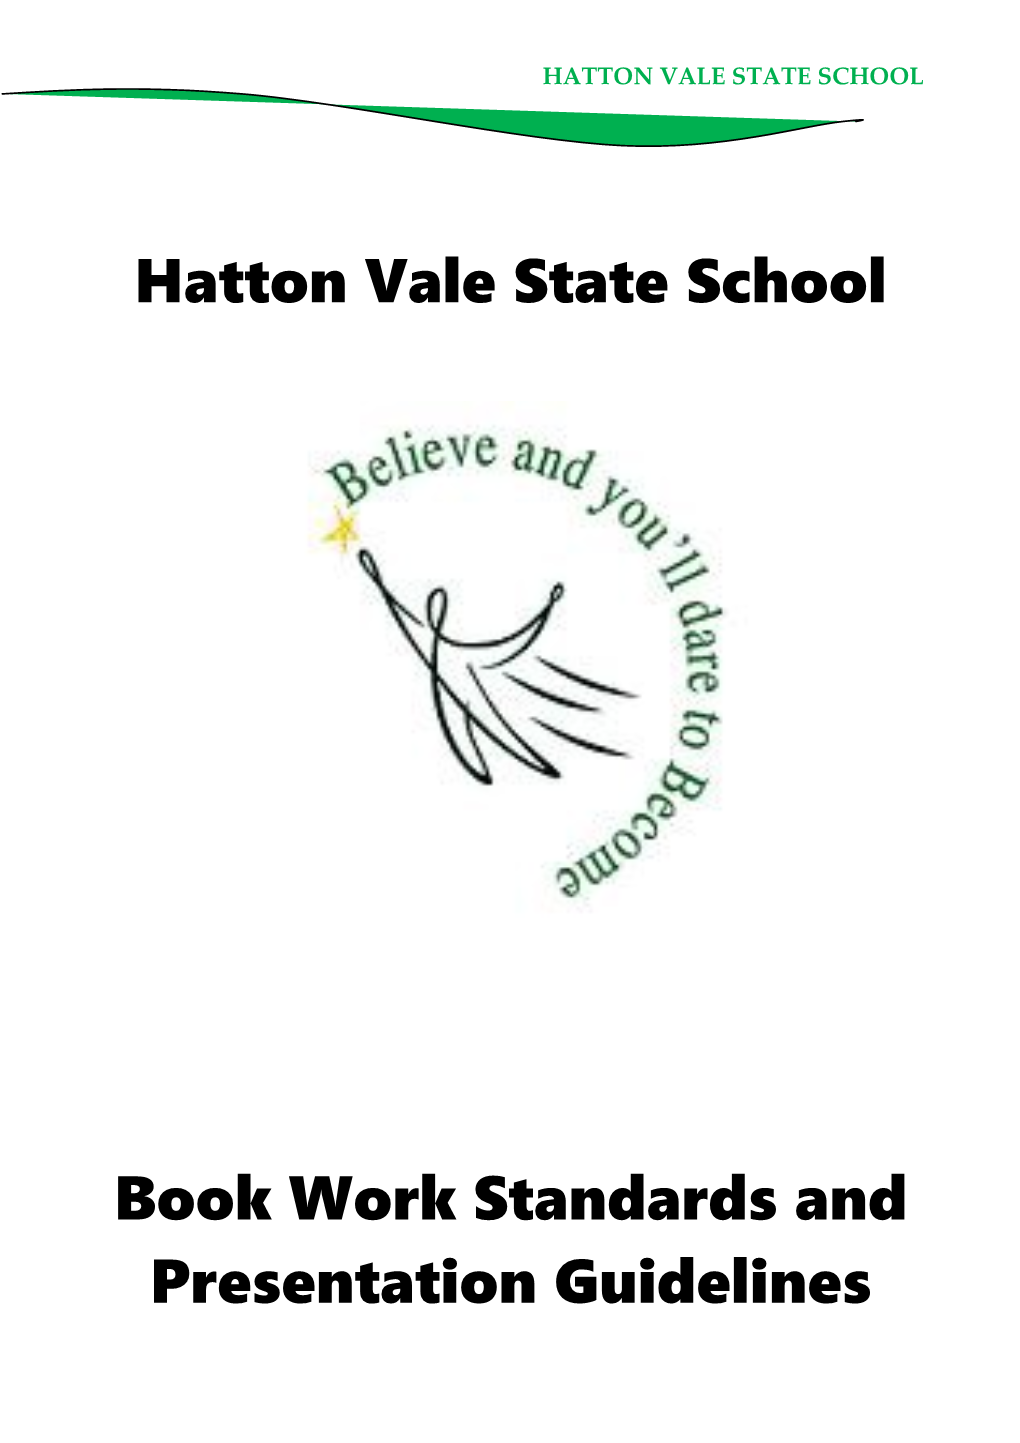 HATTON VALE STATE SCHOOL Book Work Standards and Presentation Guidelines